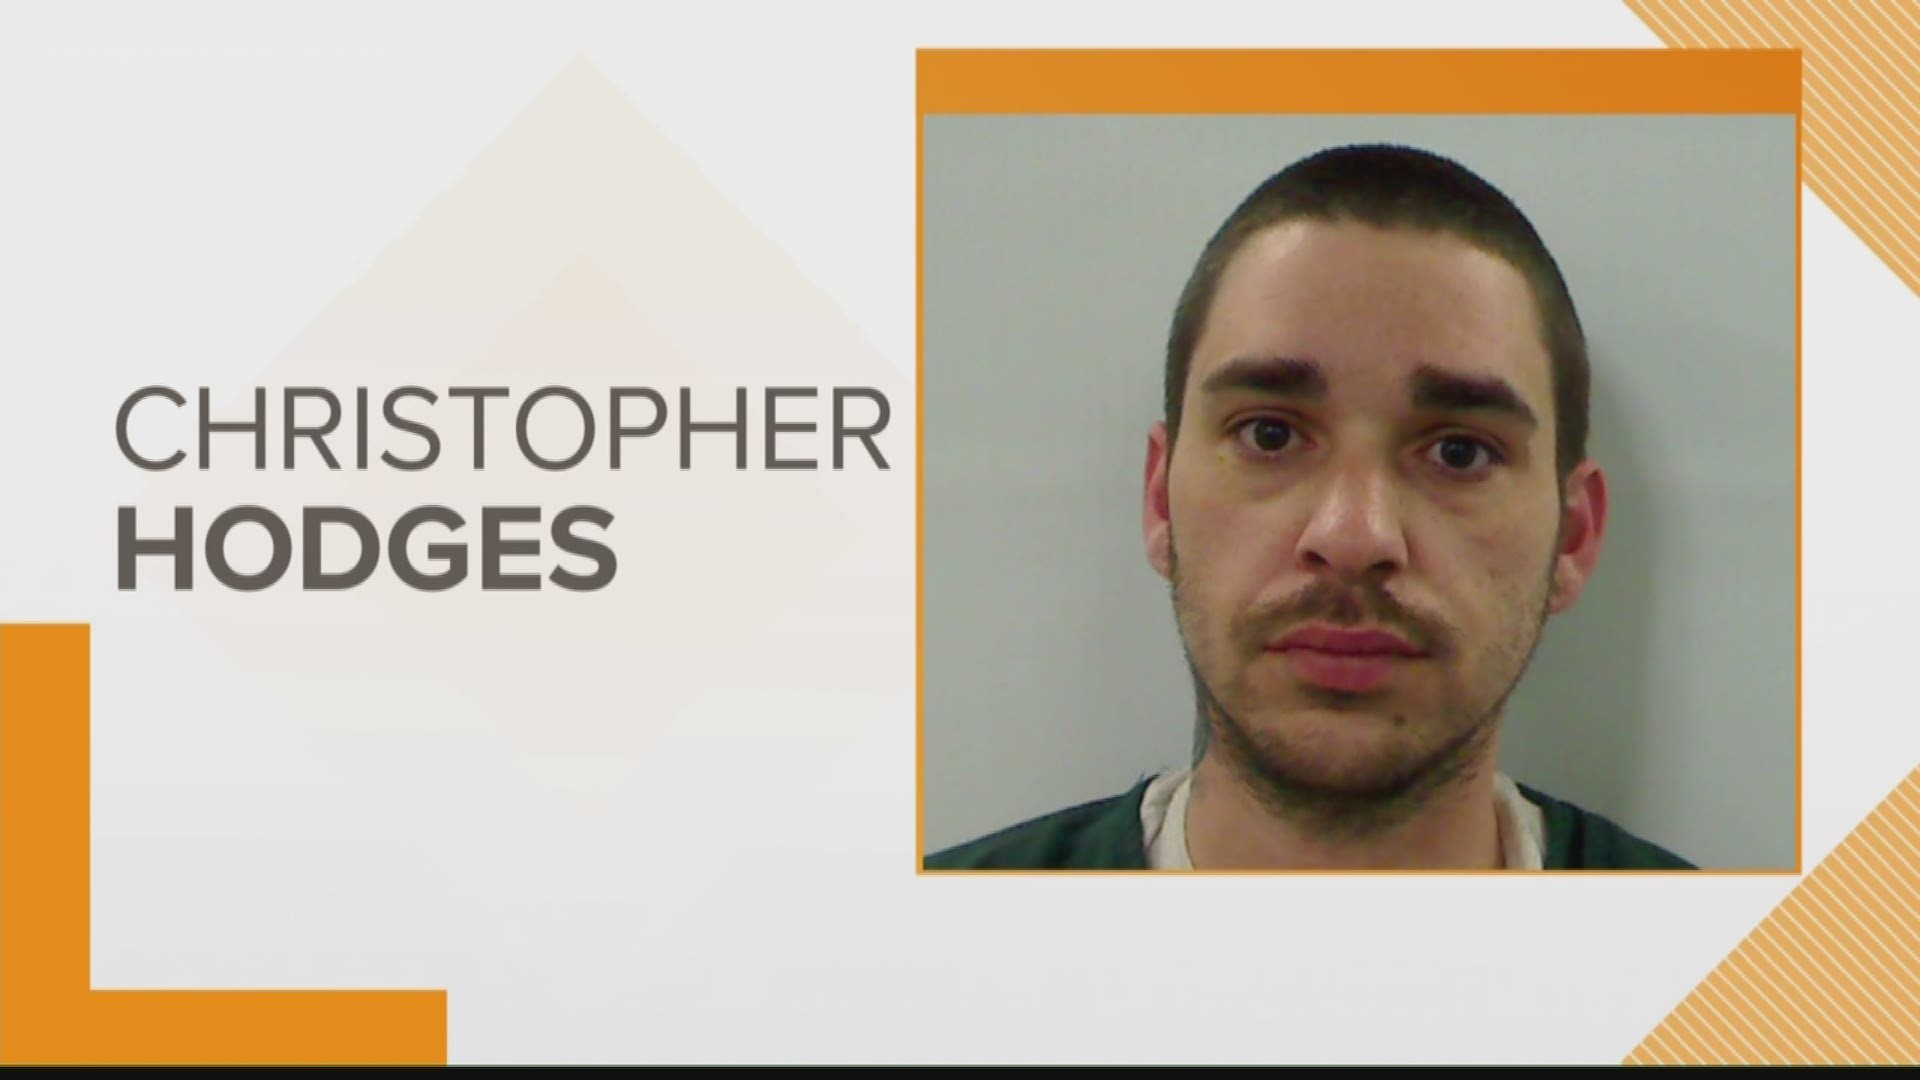 Christopher Hodges is facing two counts of theft for stealing money that was supposed to help the family of a mother who was killed.